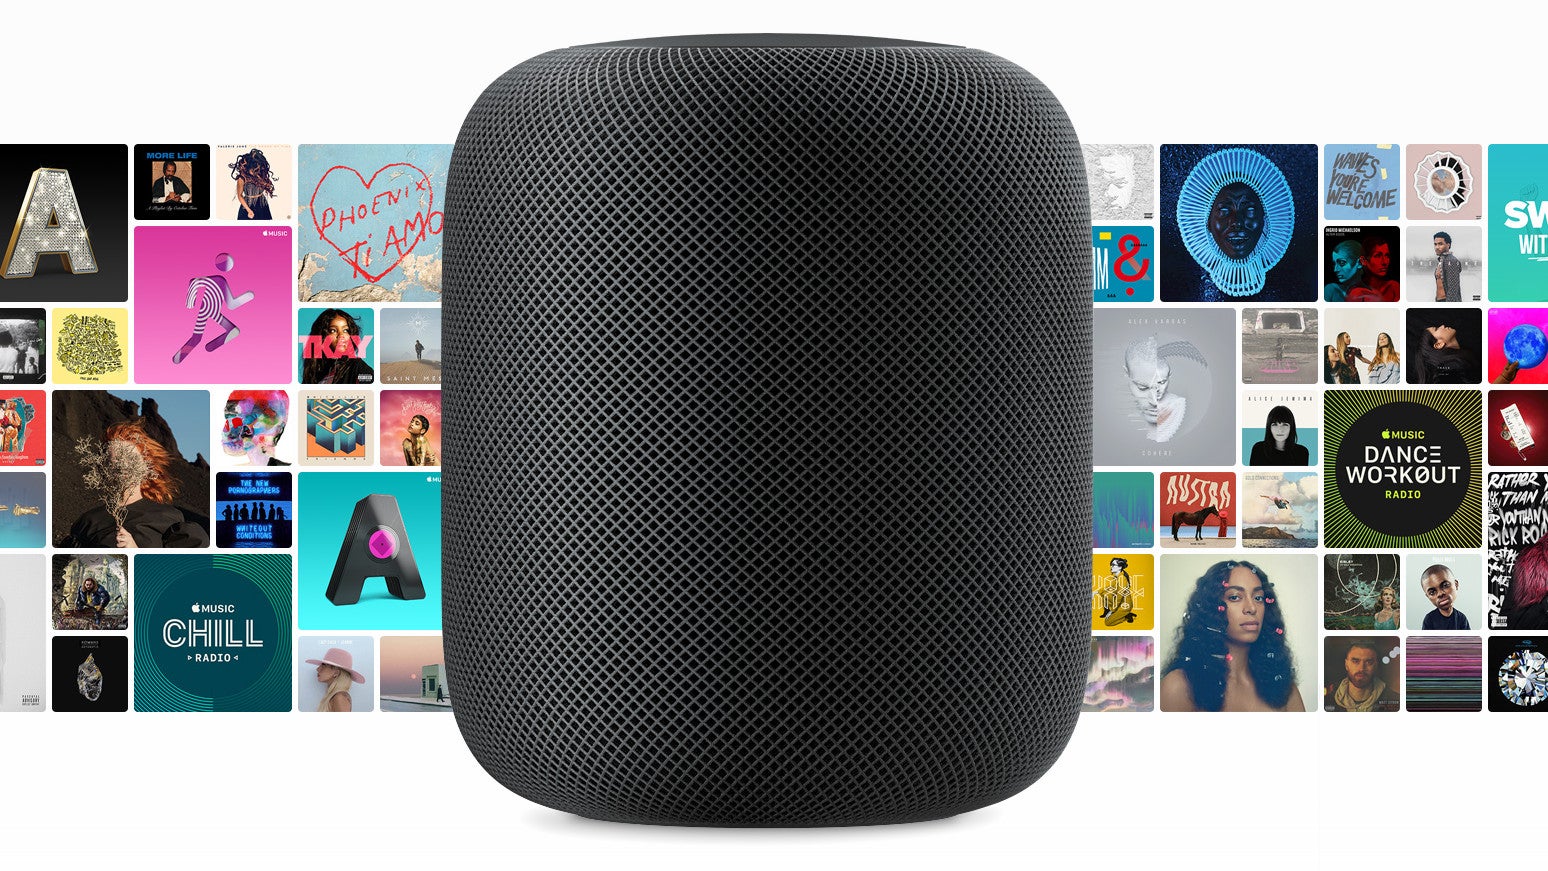 Meet HomePod! Apple's new smart speaker aims to rock the house and reinvent home audio